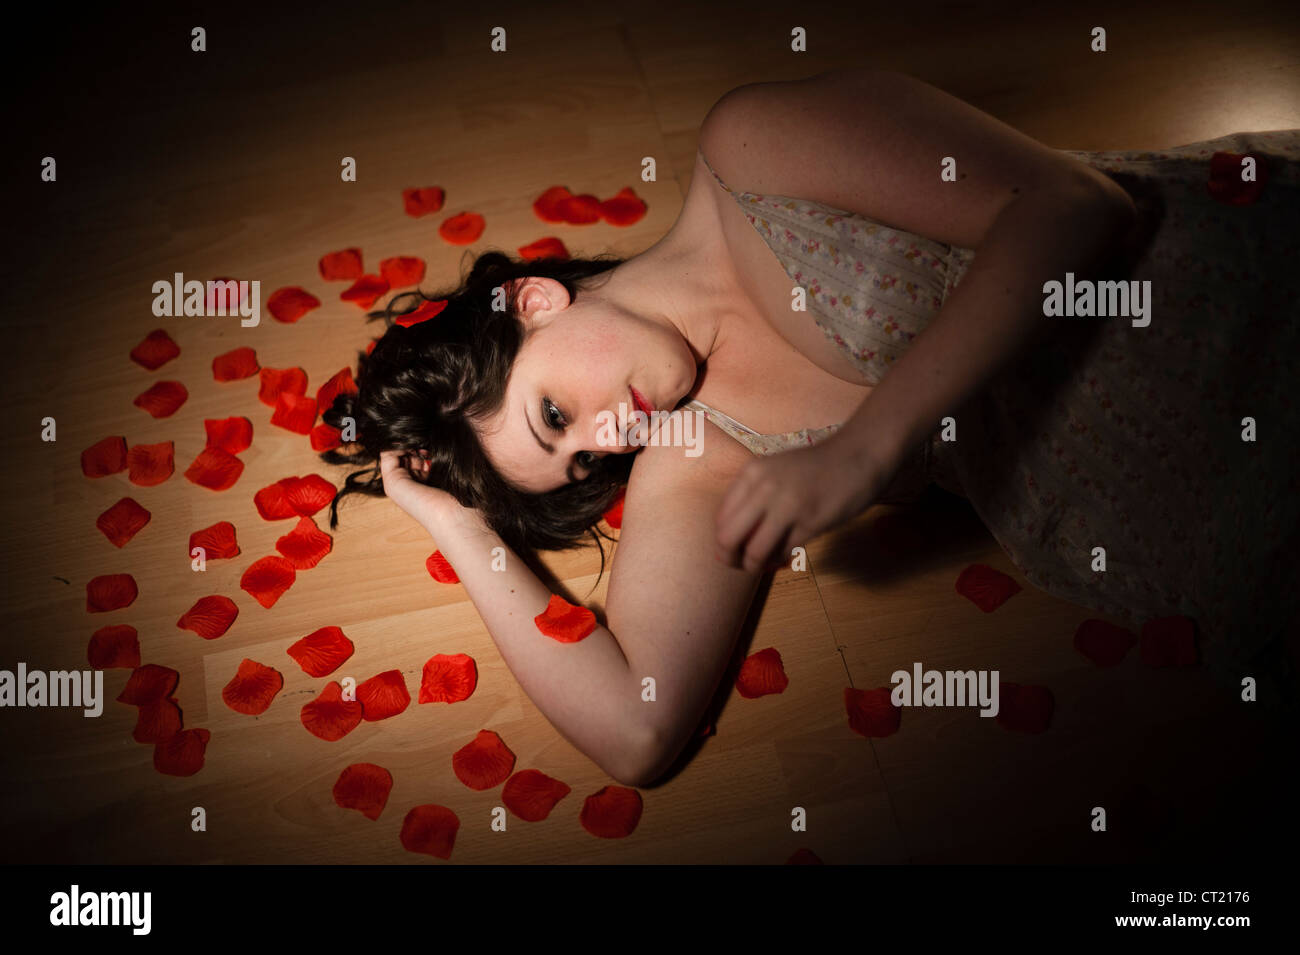 A young woman girl alone lying on scattering of red petals on a wooden floor Stock Photo